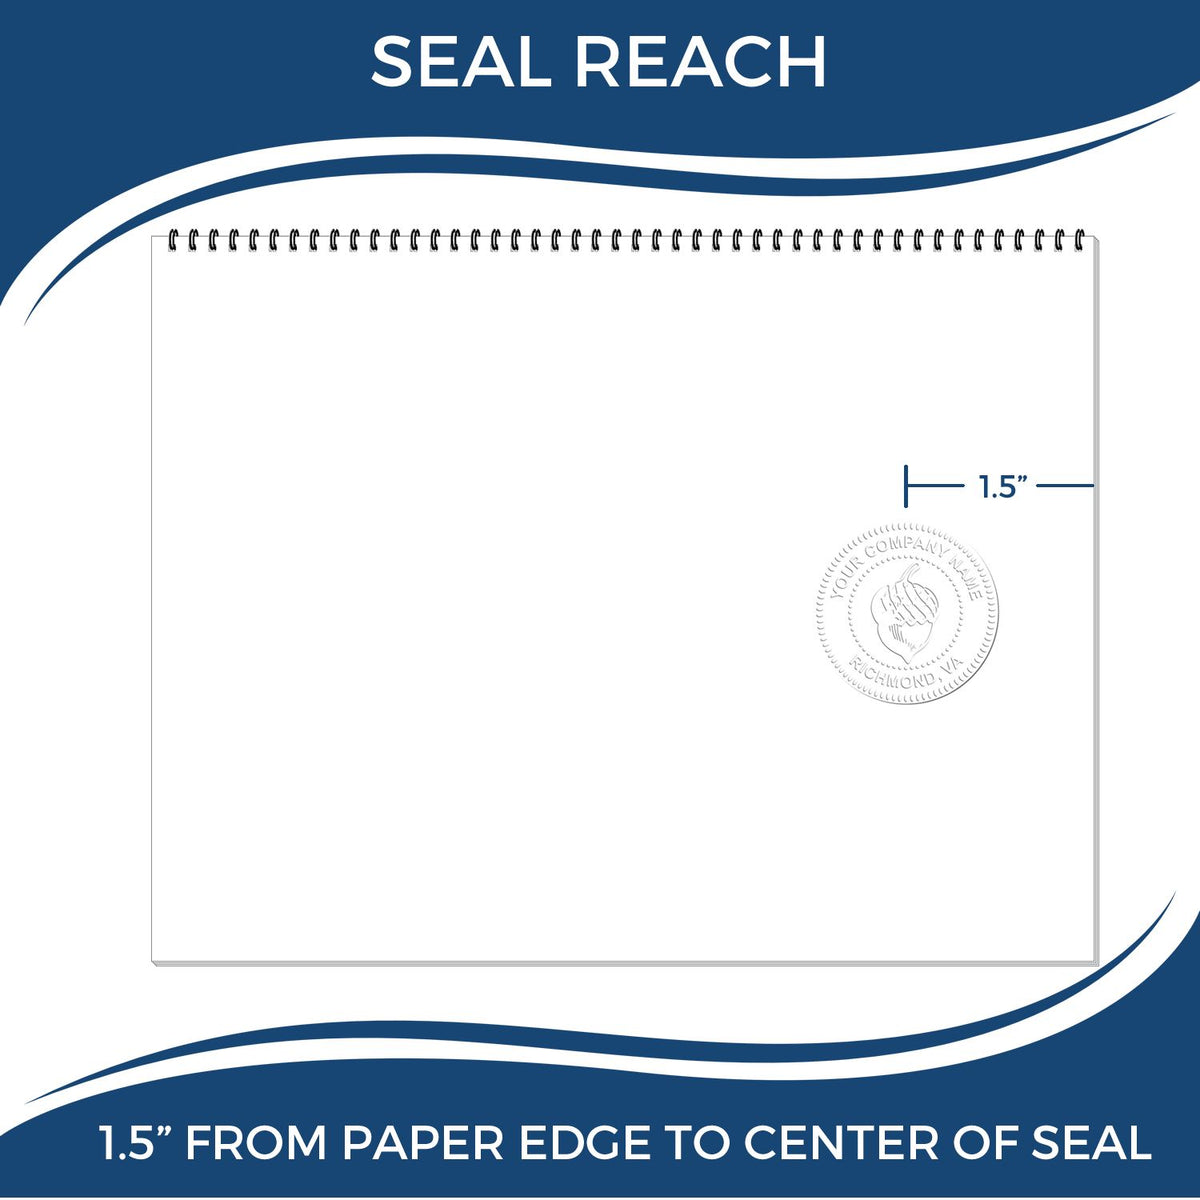 An infographic showing the seal reach which is represented by a ruler and a miniature seal image of the Gift Texas Landscape Architect Seal